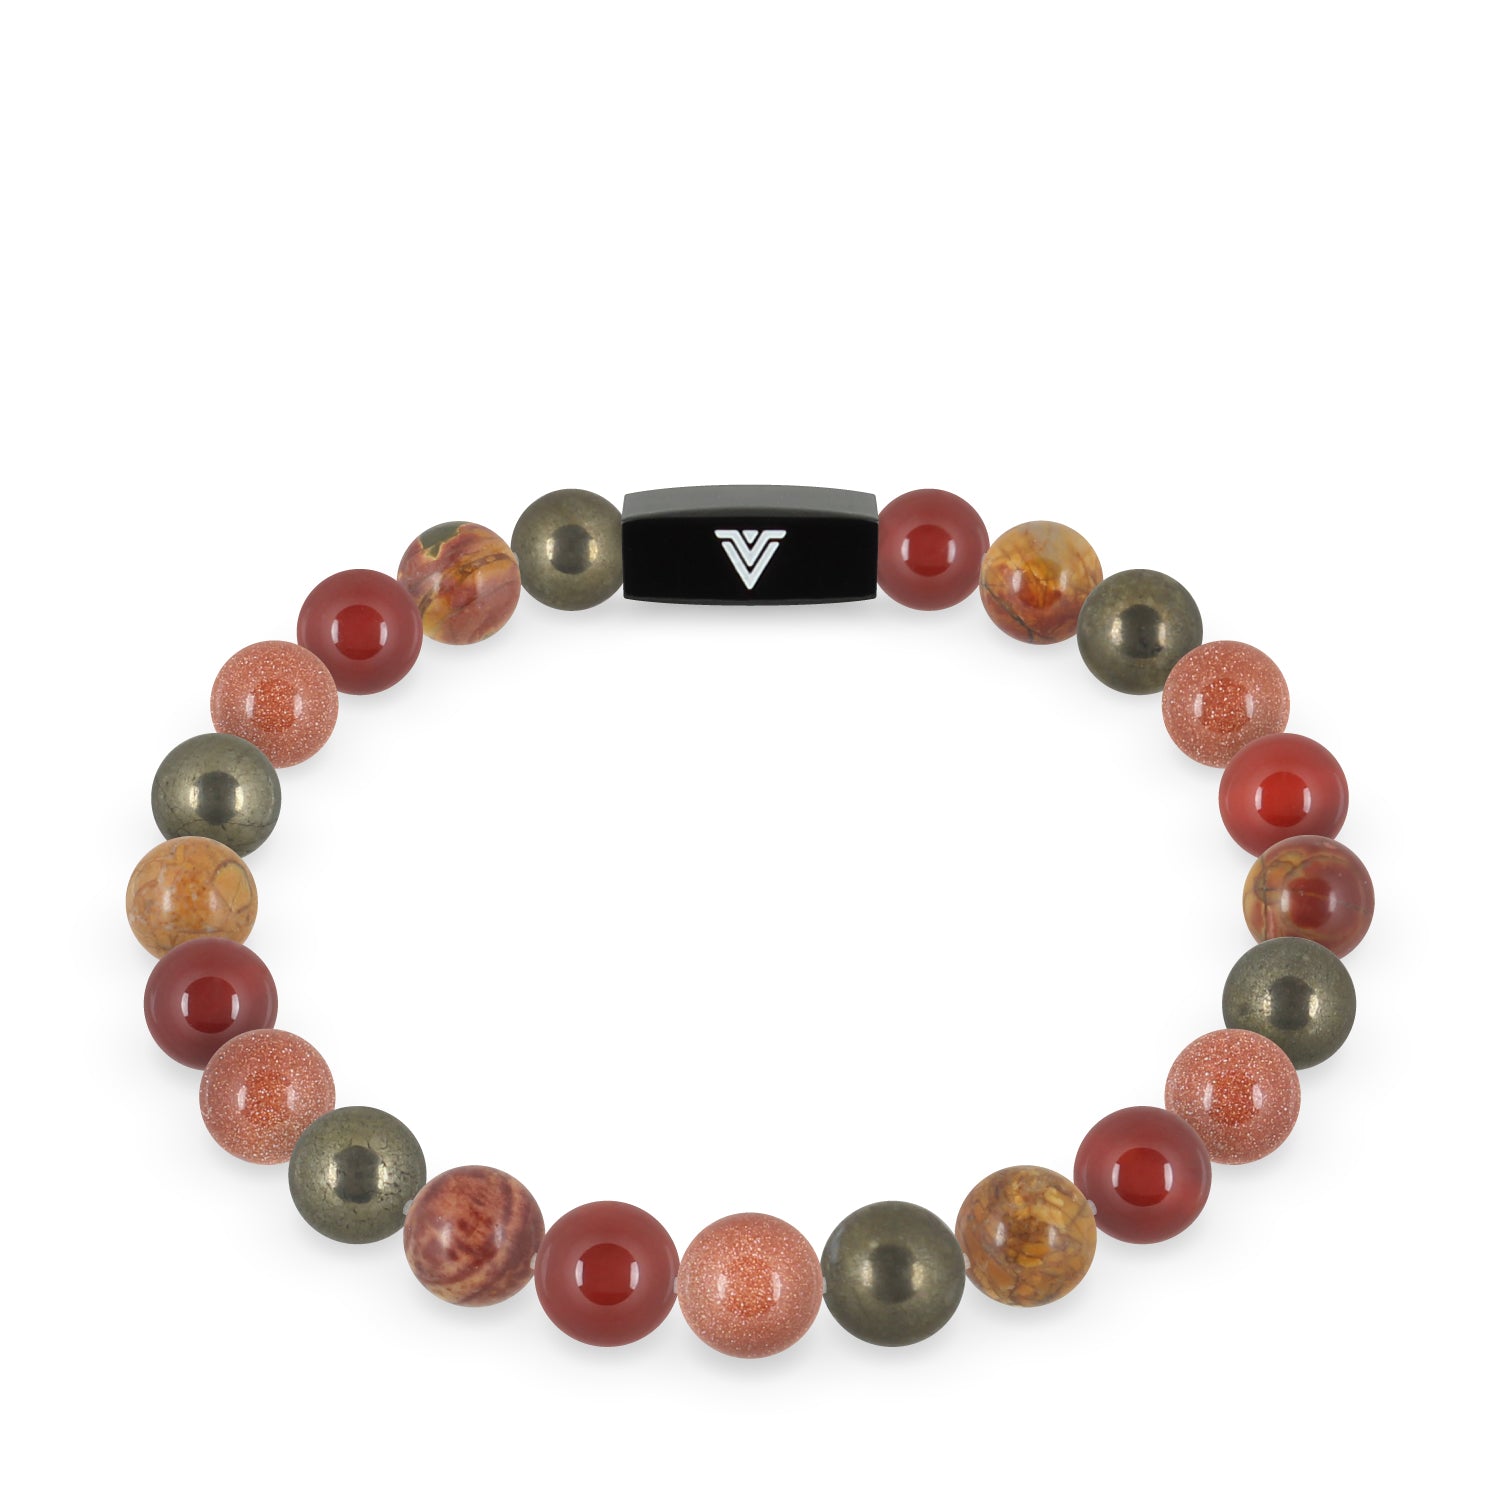 Front view of an 8mm Sacral Chakra crystal beaded stretch bracelet with black stainless steel logo bead made by Voltlin